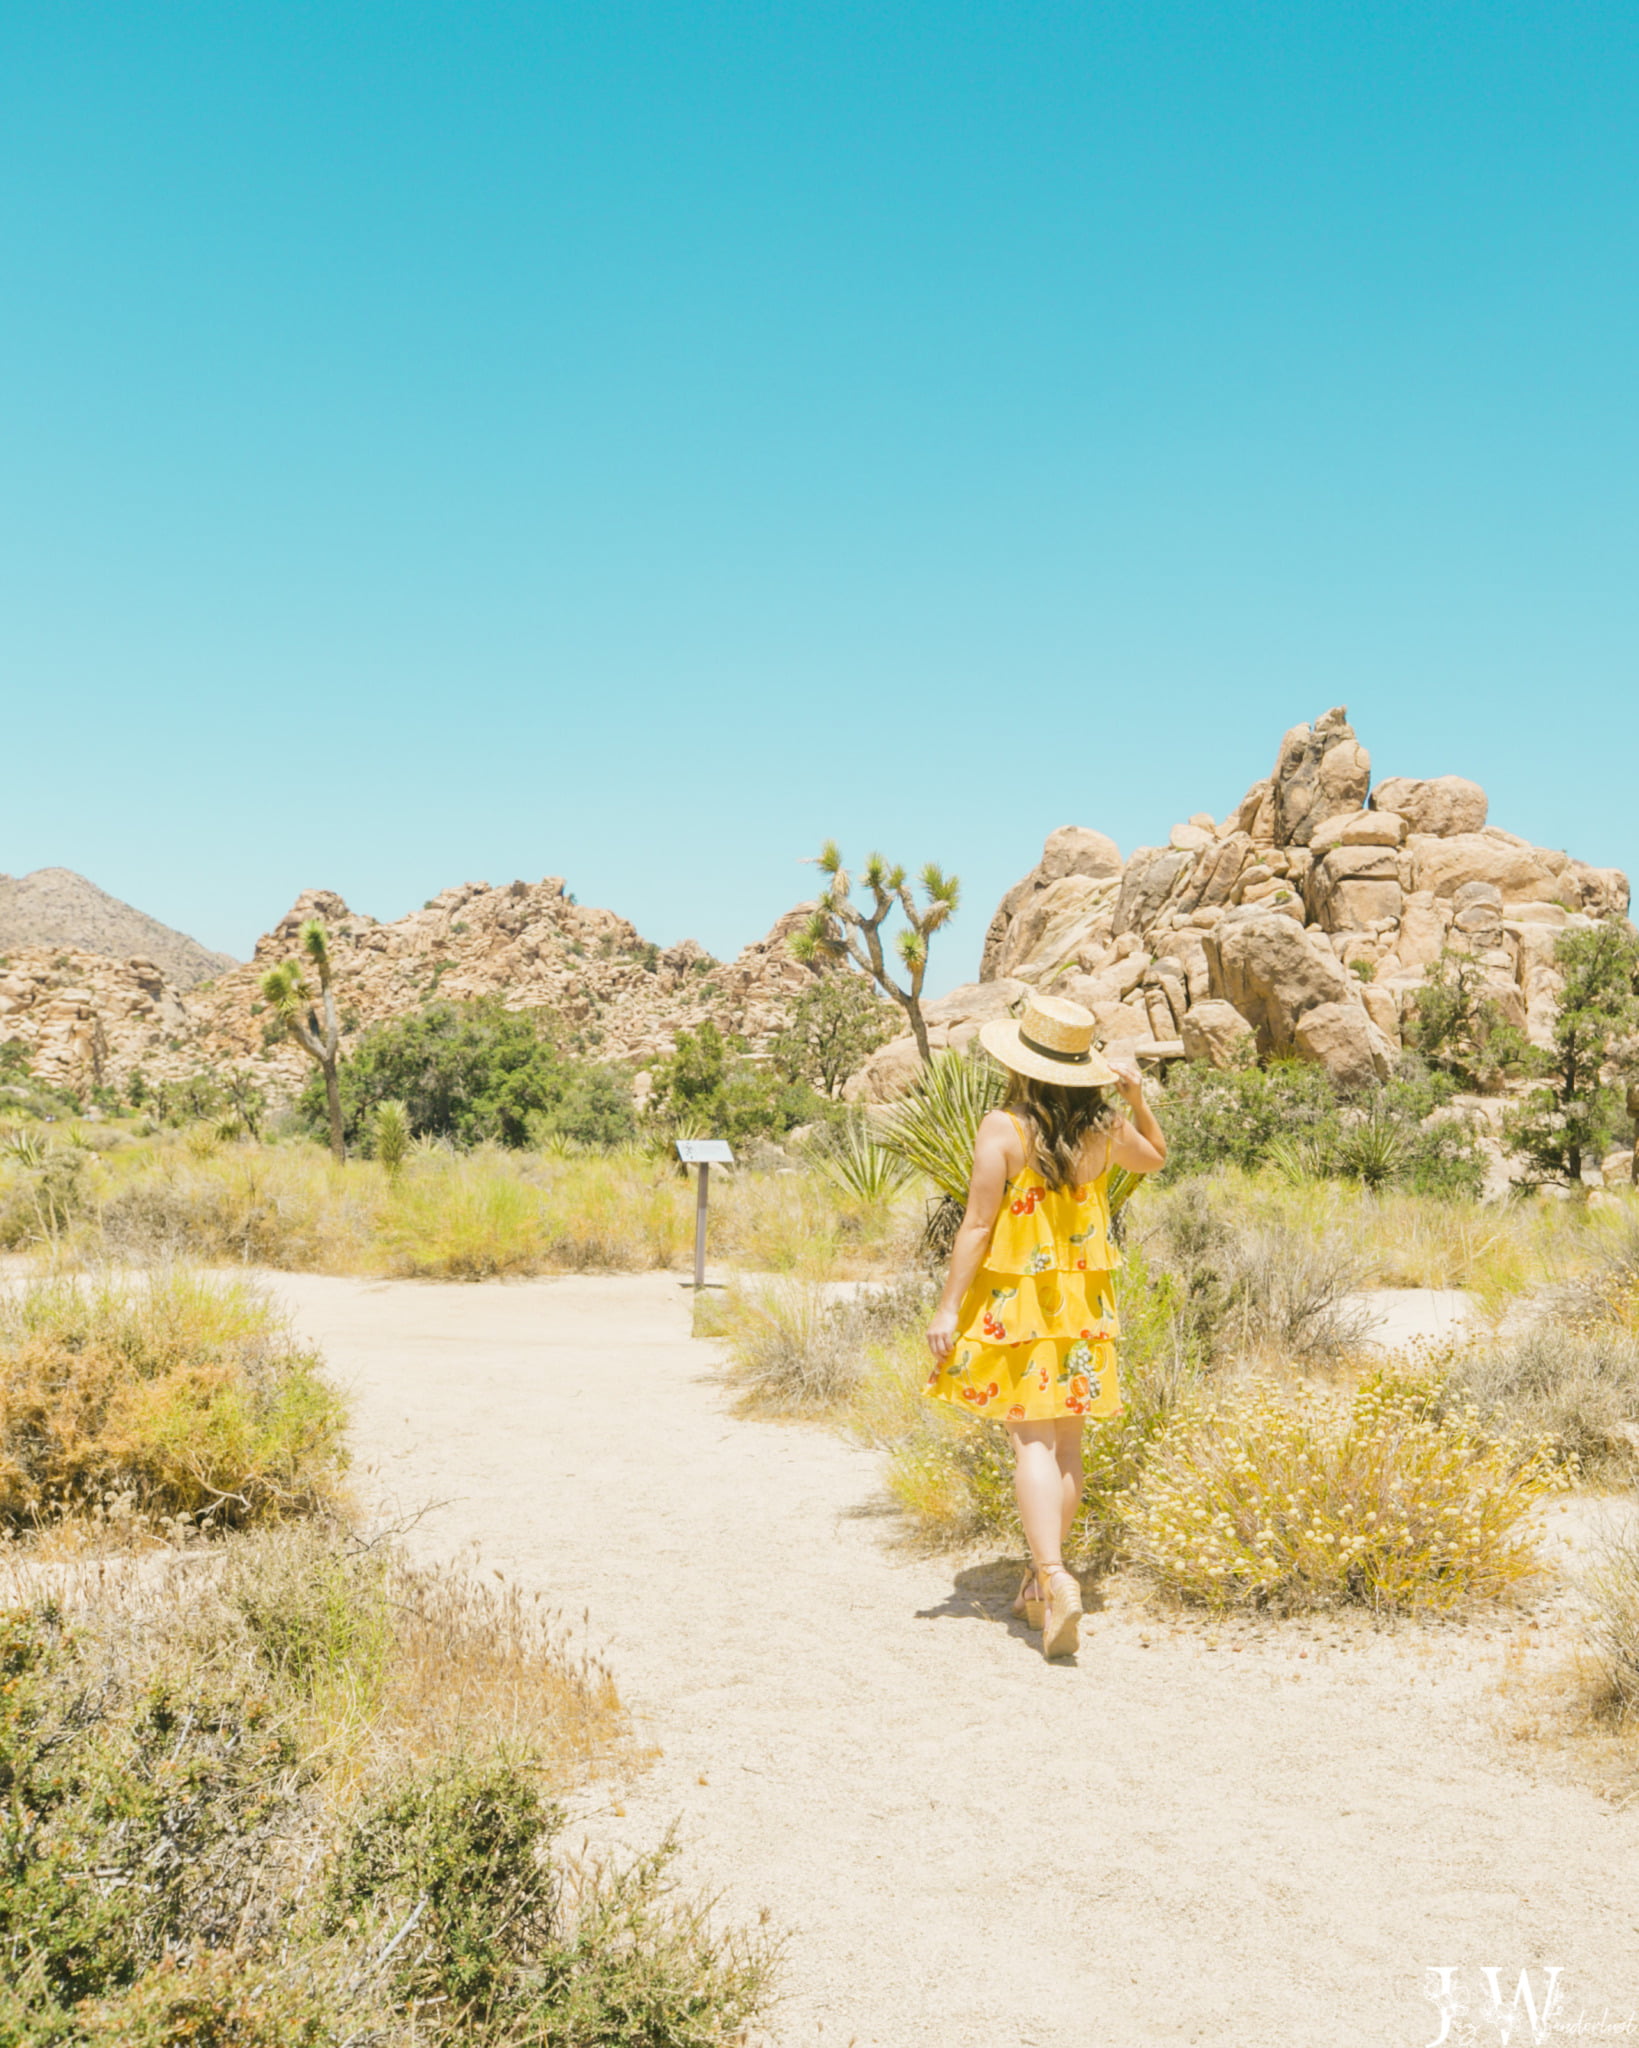 Hidden Valley Natural Trail in Joshua Tree National Park. Photography by Jaz Wanderlust.